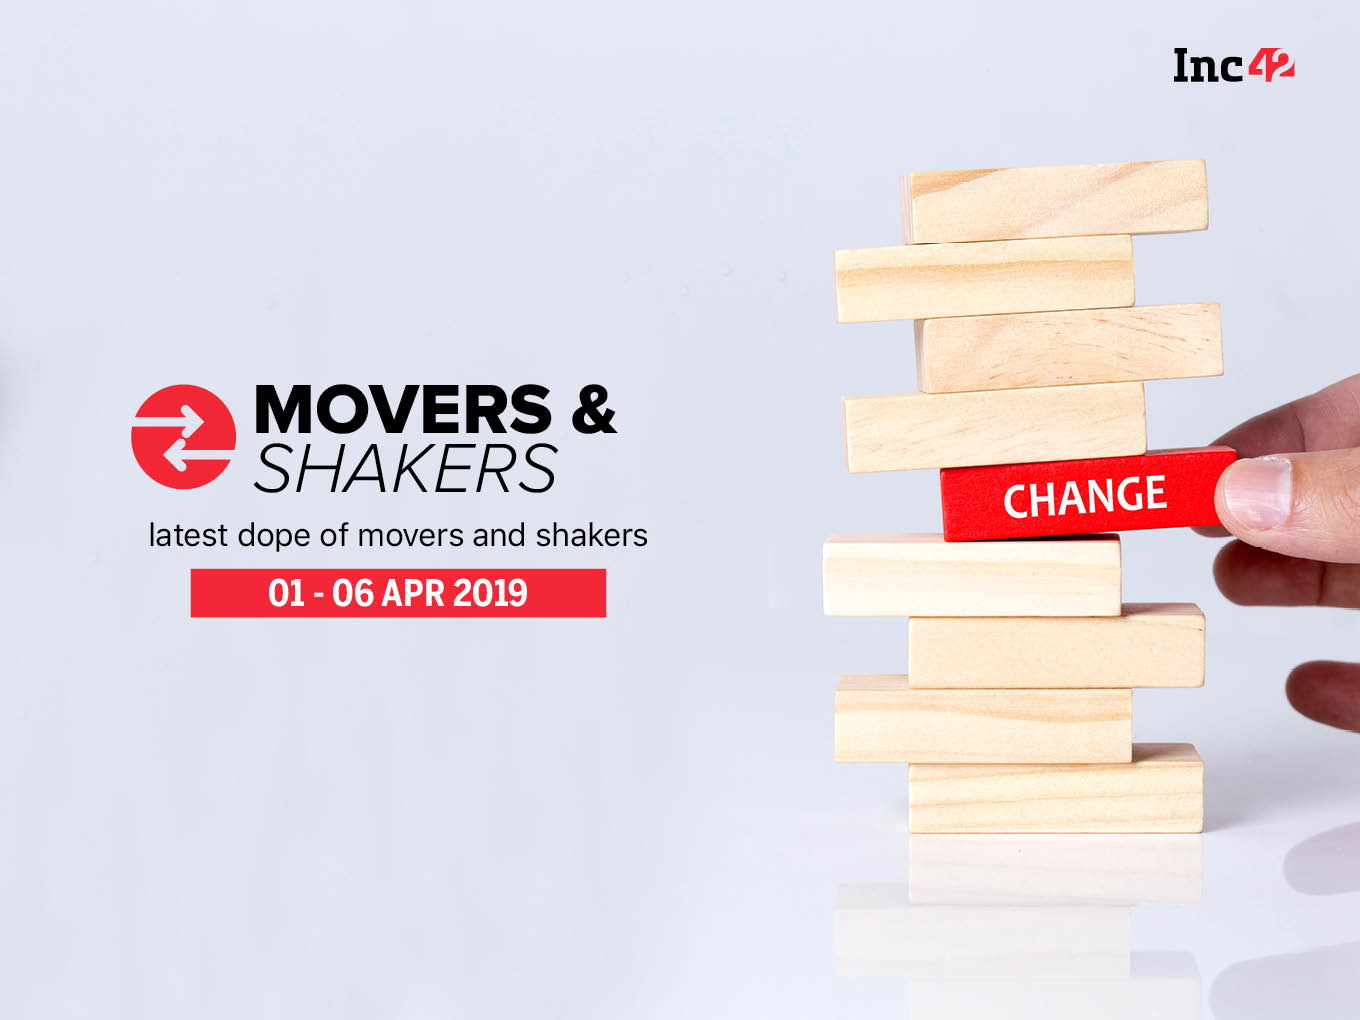 Movers & Shakers 2019